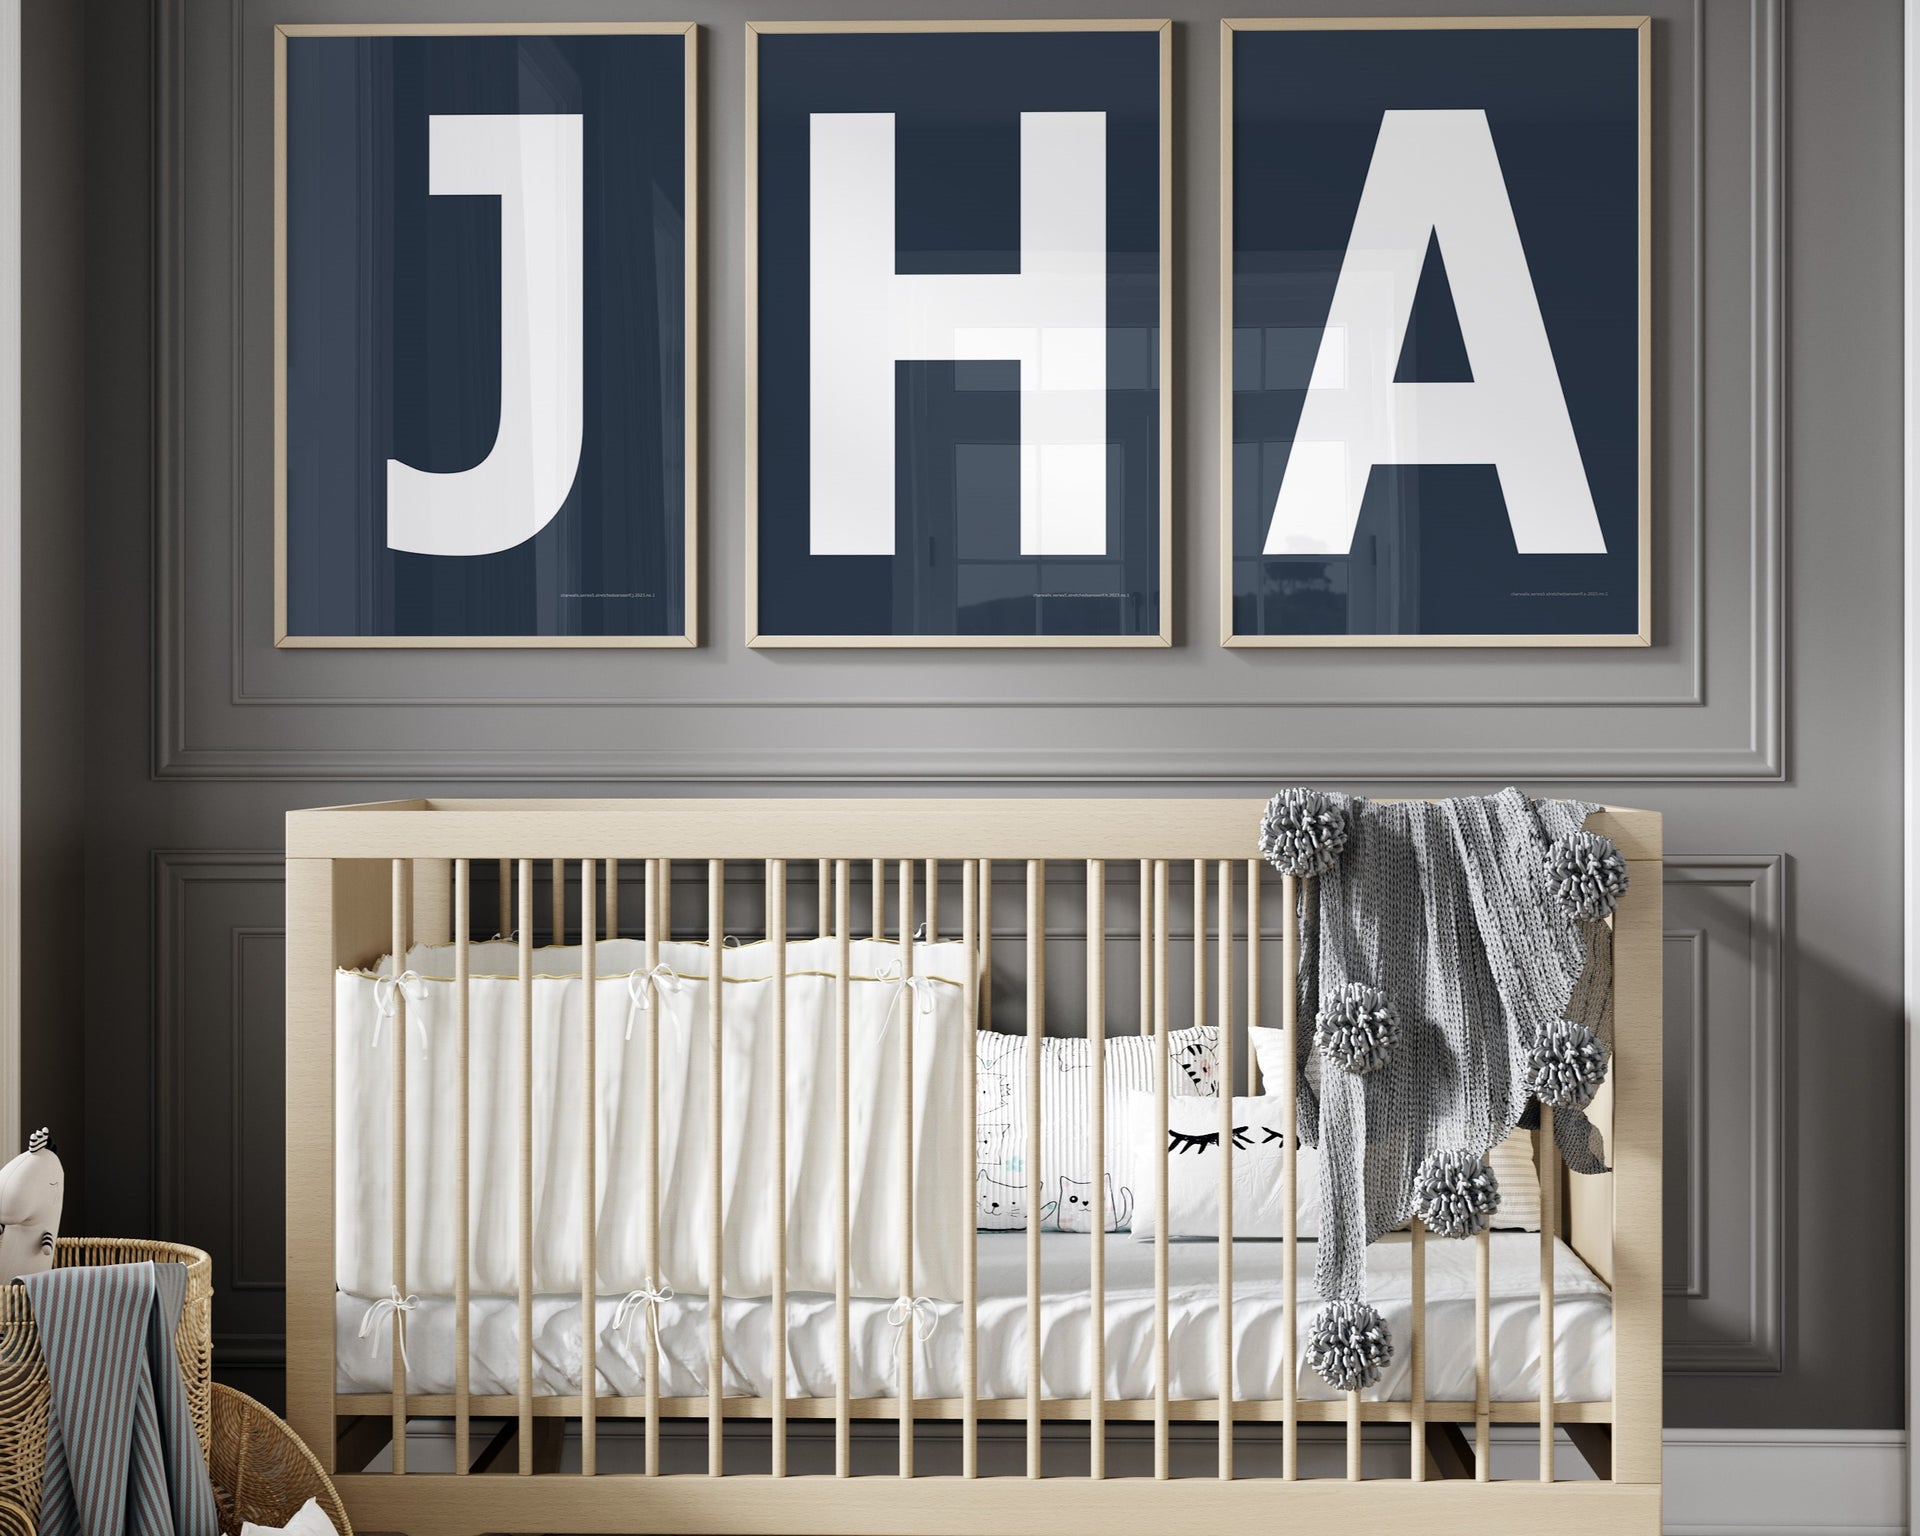 3 Framed letter art prints featuring navy blue and white initials hanging above a crib in a gray boy nursery.